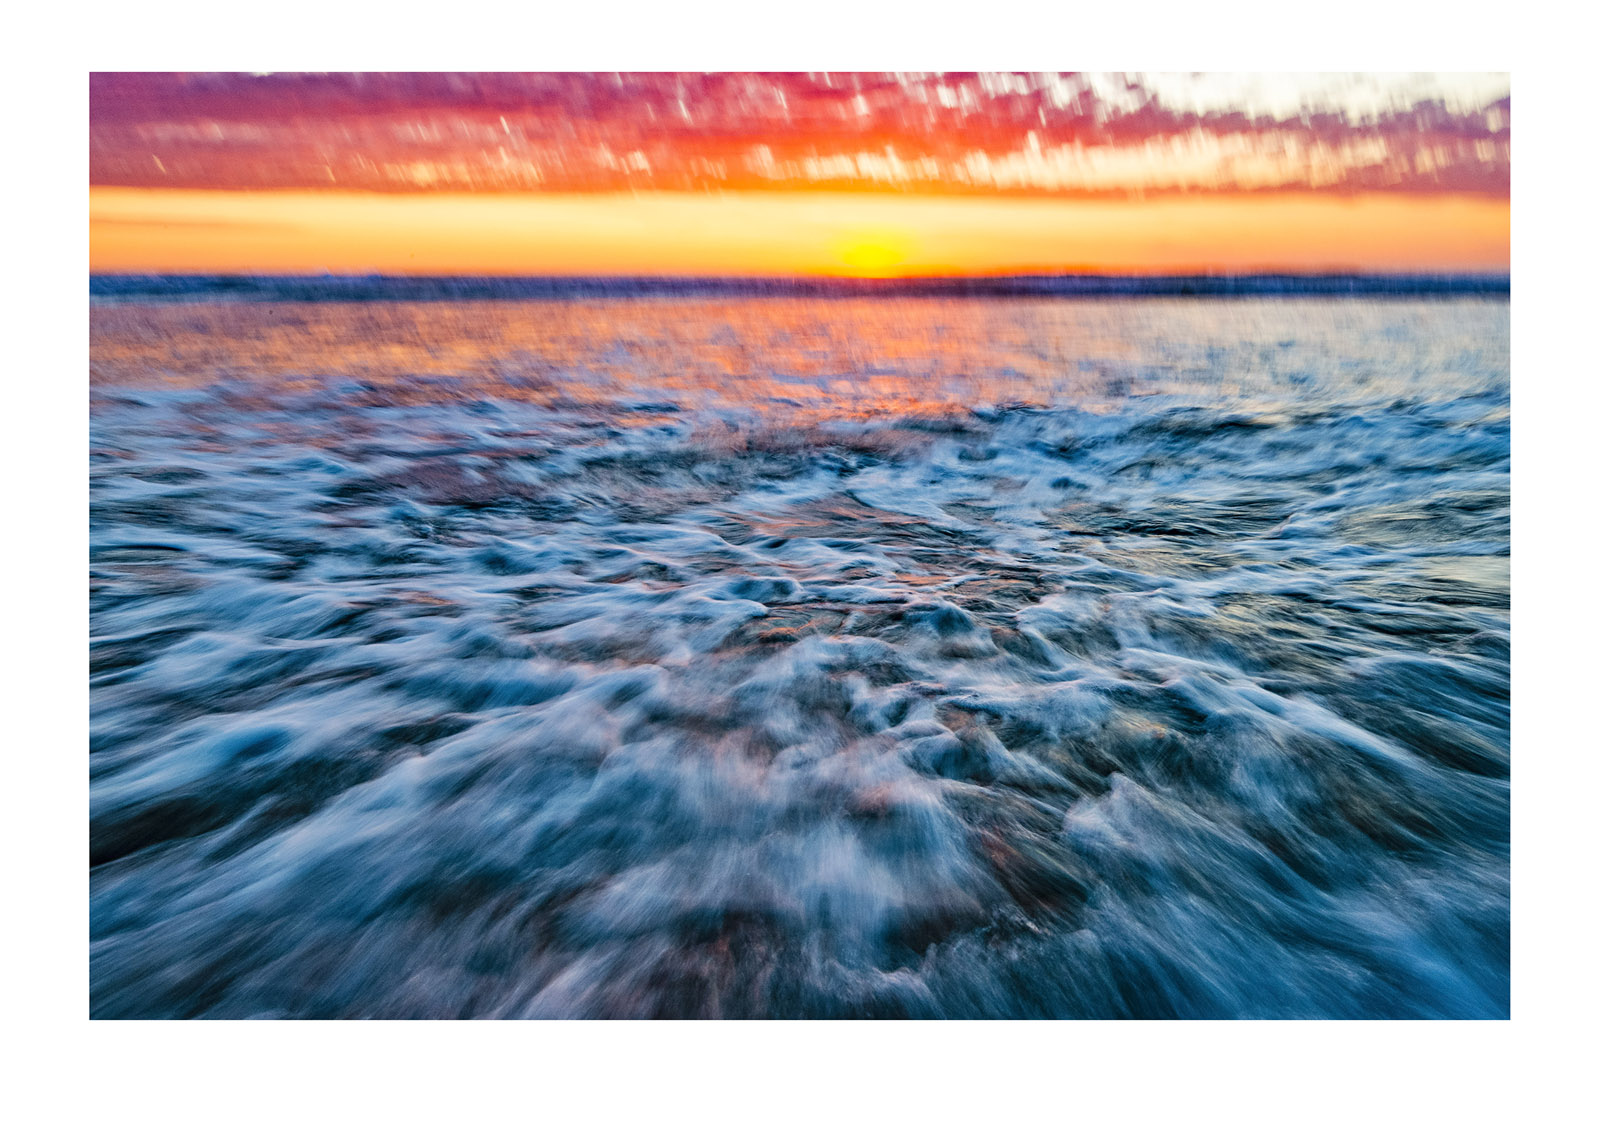 The blur of waves rushing onto a beach on an incoming tide at sunset. Venus Bay, Victoria, Australia.